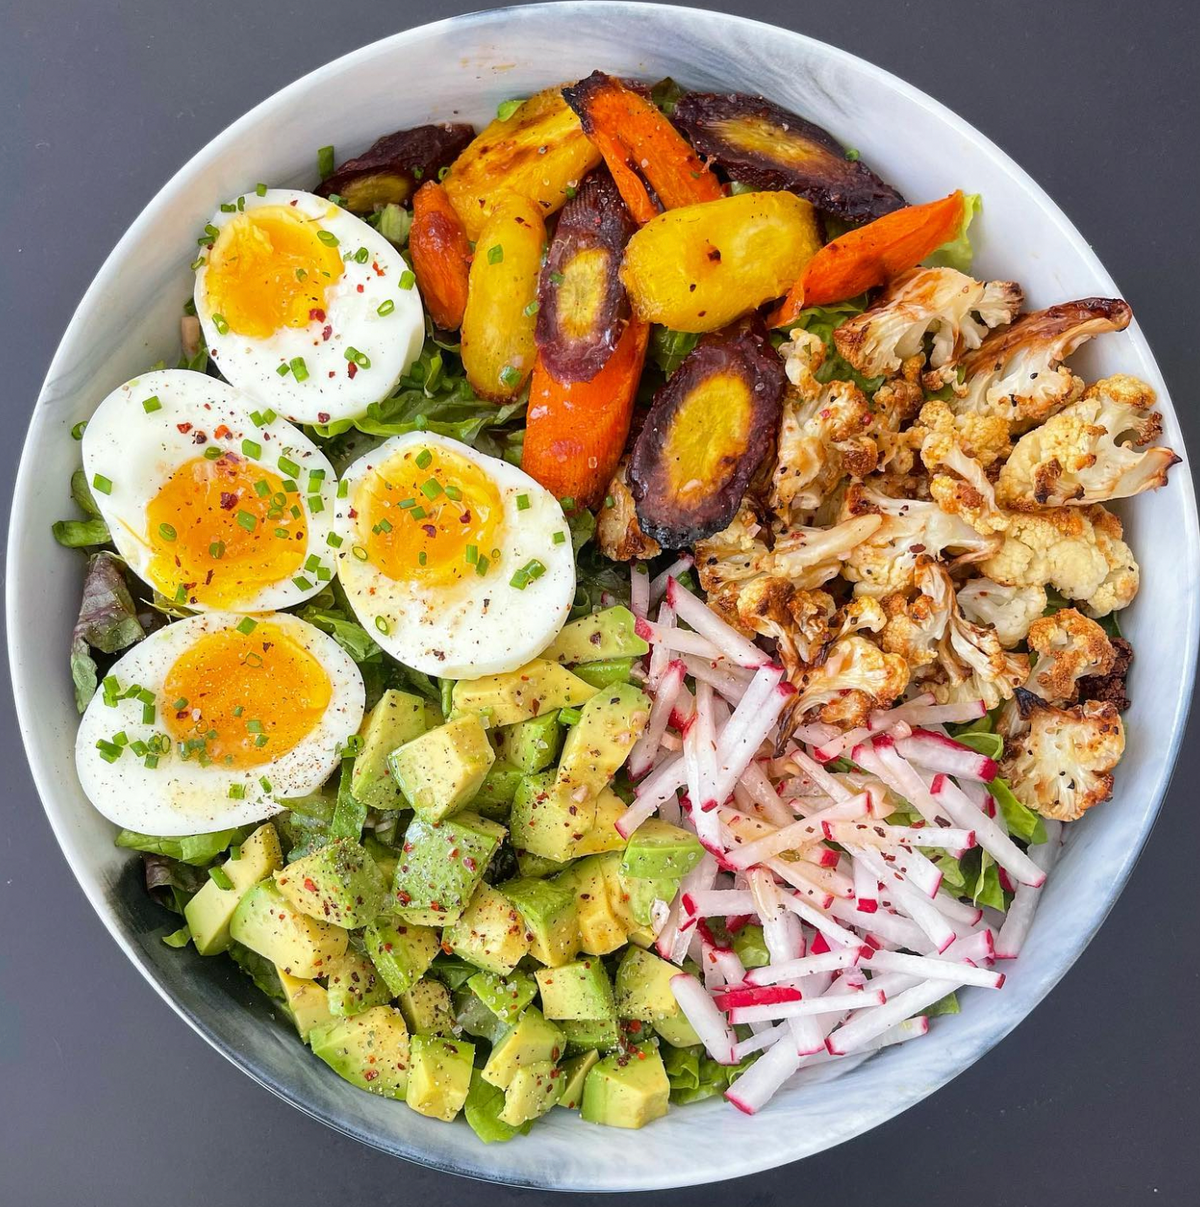 Picture of bowl of salad with eggs, avocado, radish, cauliflower, and more.